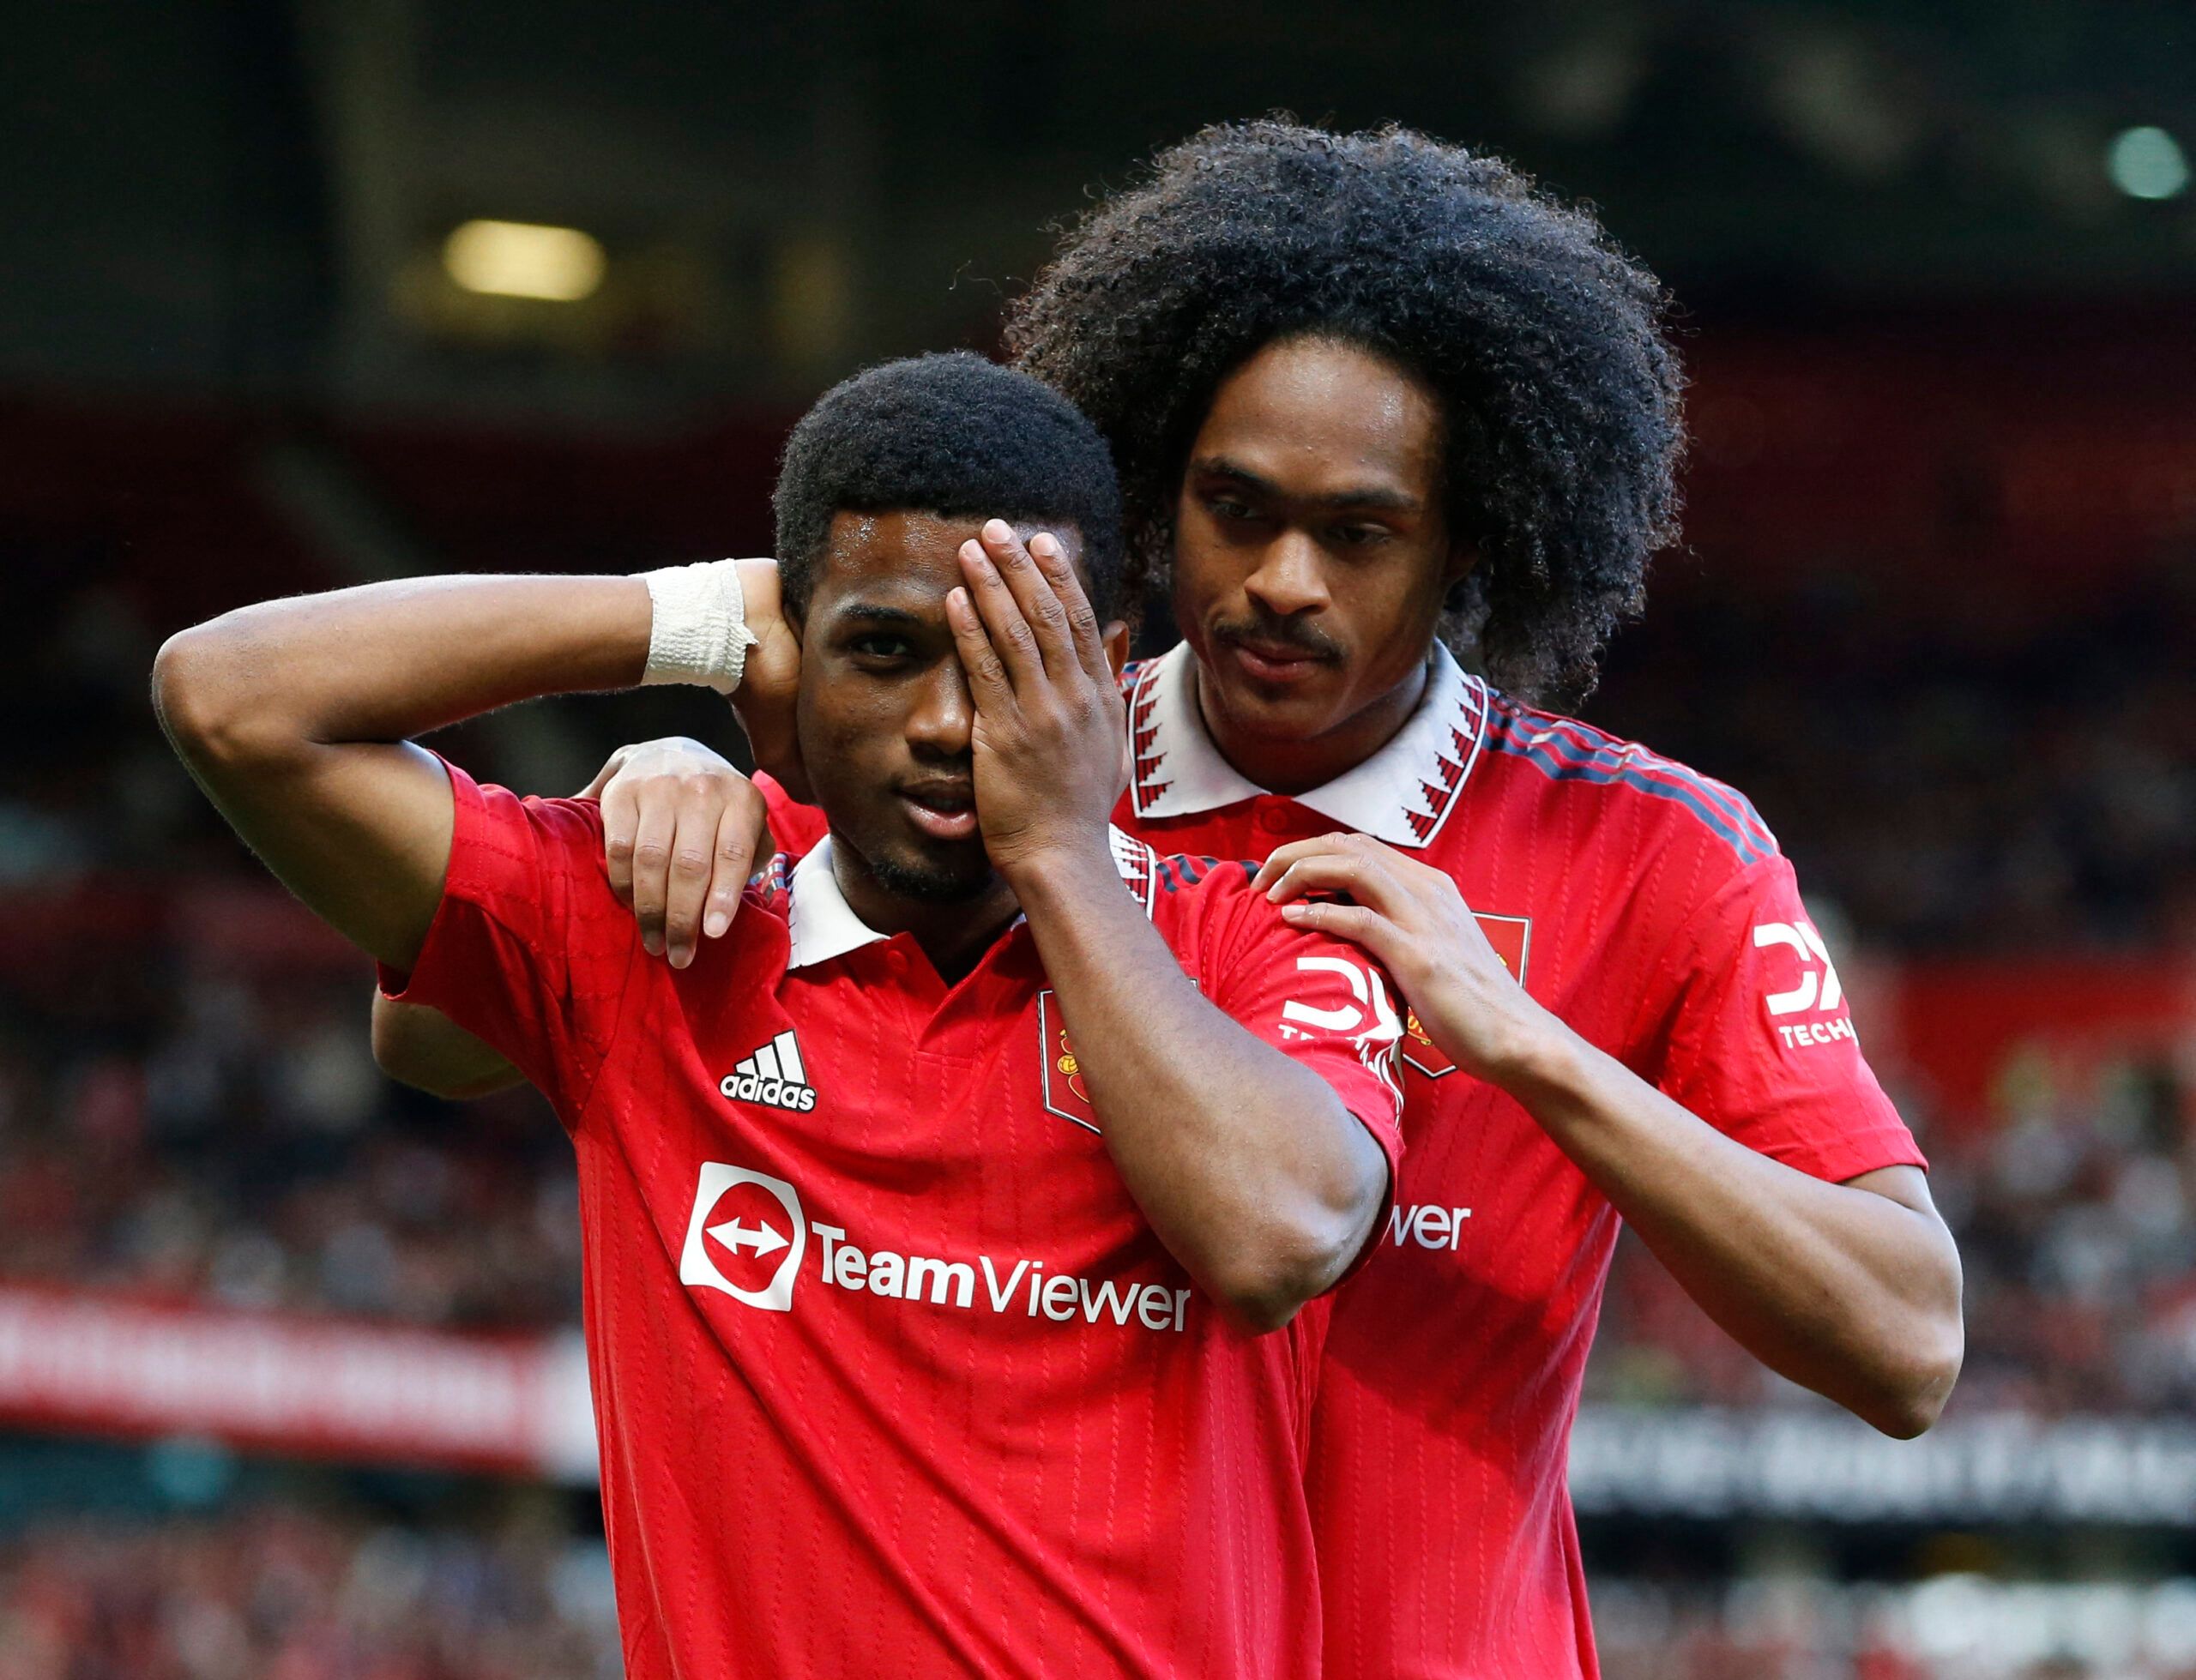 Soccer Football - Pre Season Friendly - Manchester United v Rayo Vallecano - Old Trafford, Manchester, Britain - July 31, 2022 Manchester United's Amad Diallo celebrates scoring their first goal with teammate Tahith Chong Action Images via Reuters/Ed Sykes